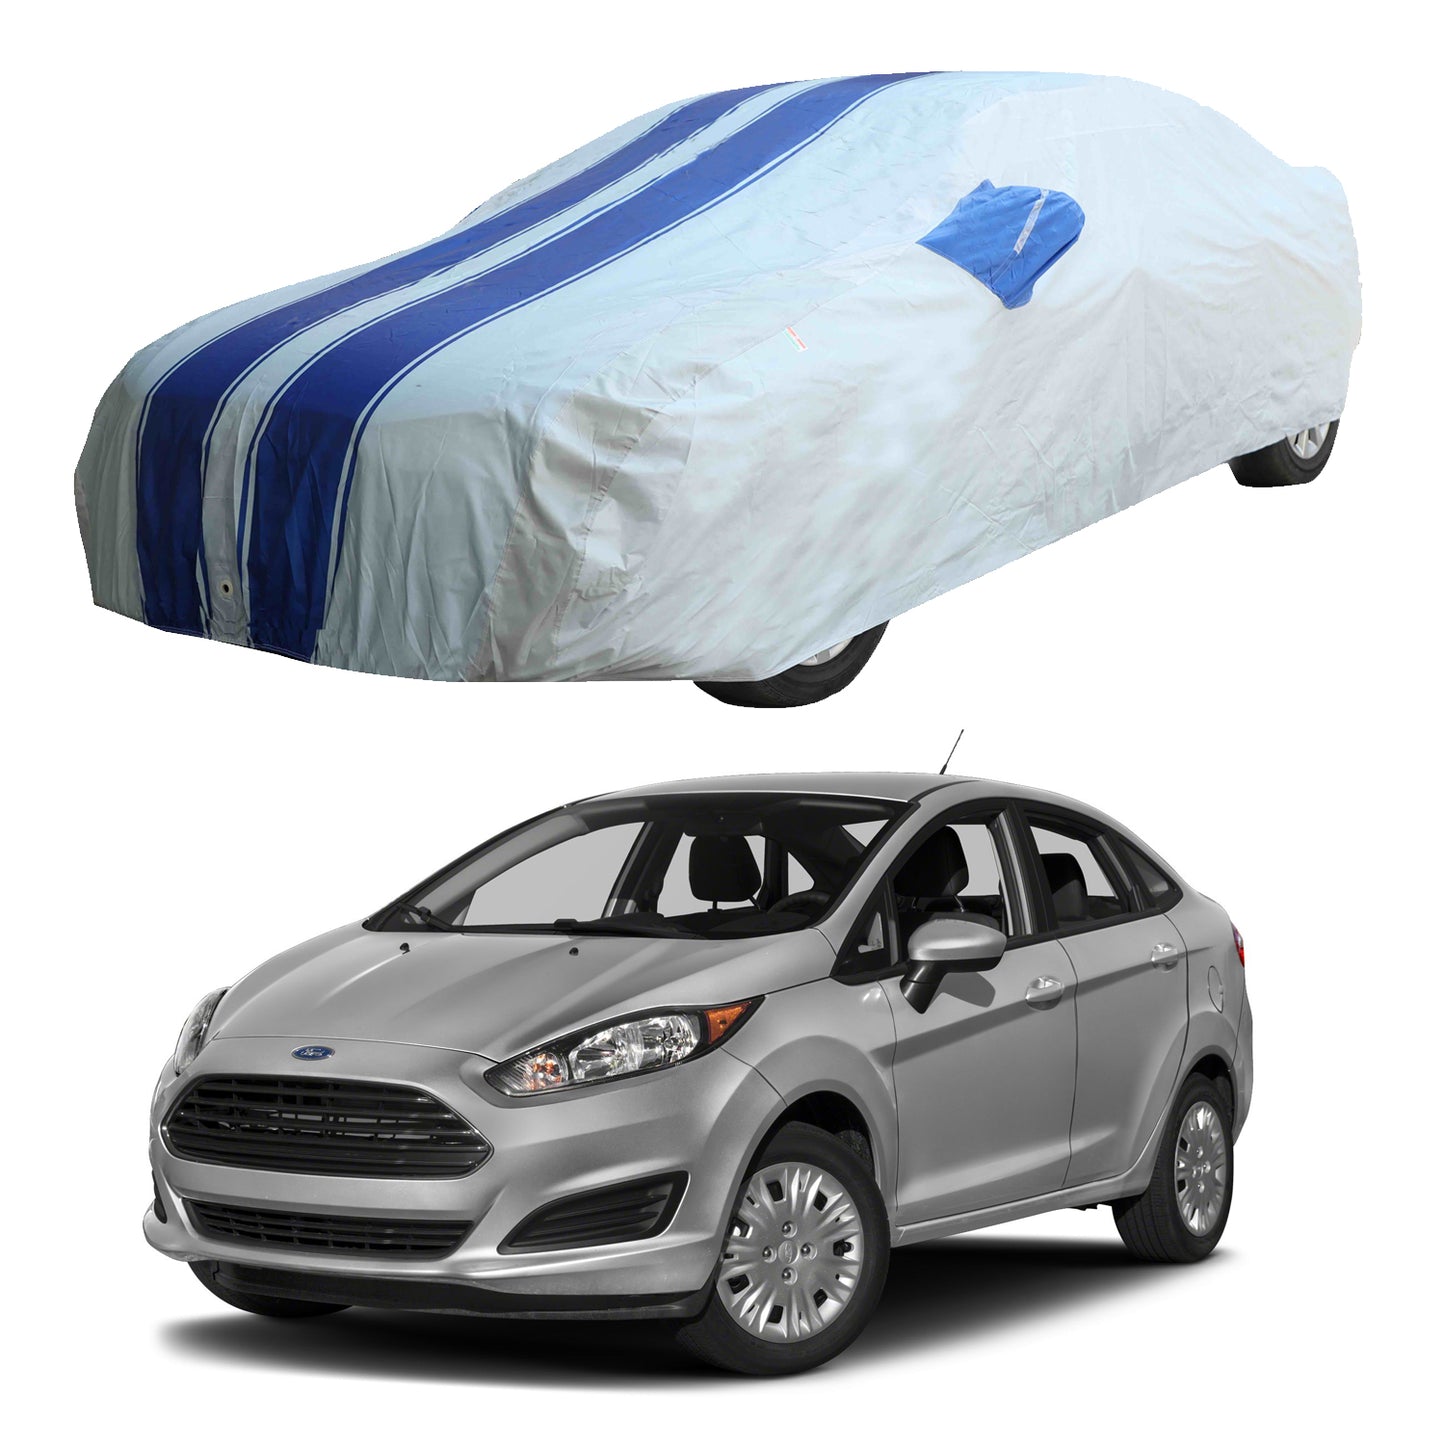 Oshotto 100% Blue dustproof and Water Resistant Car Body Cover with Mirror Pockets For Ford Fiesta